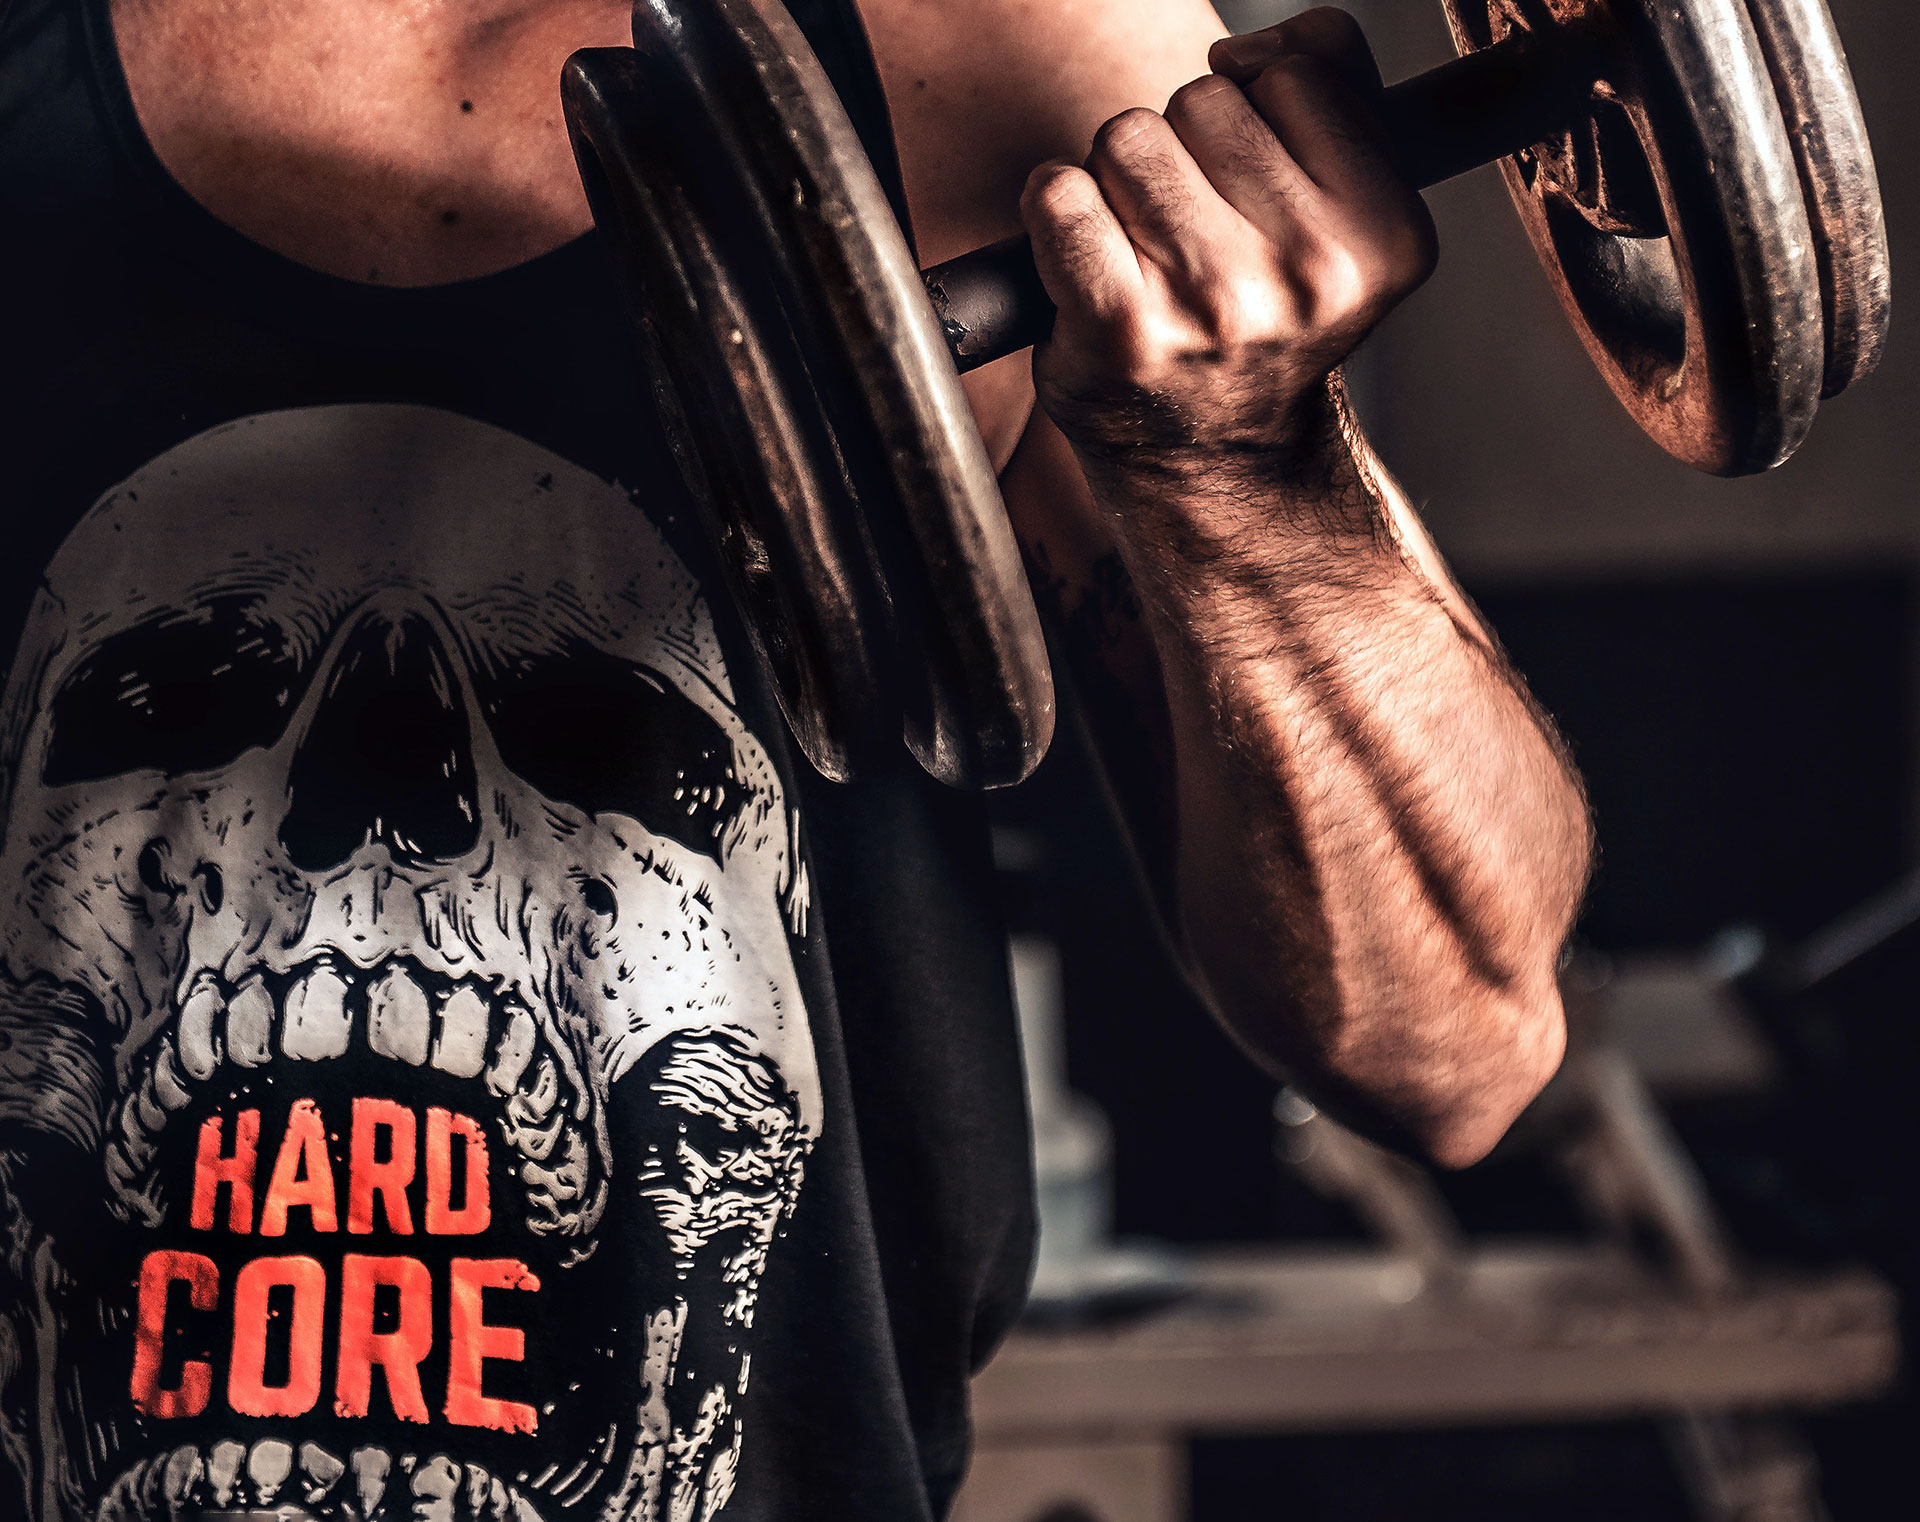 Hardcore music seminar, become the best version of yourself